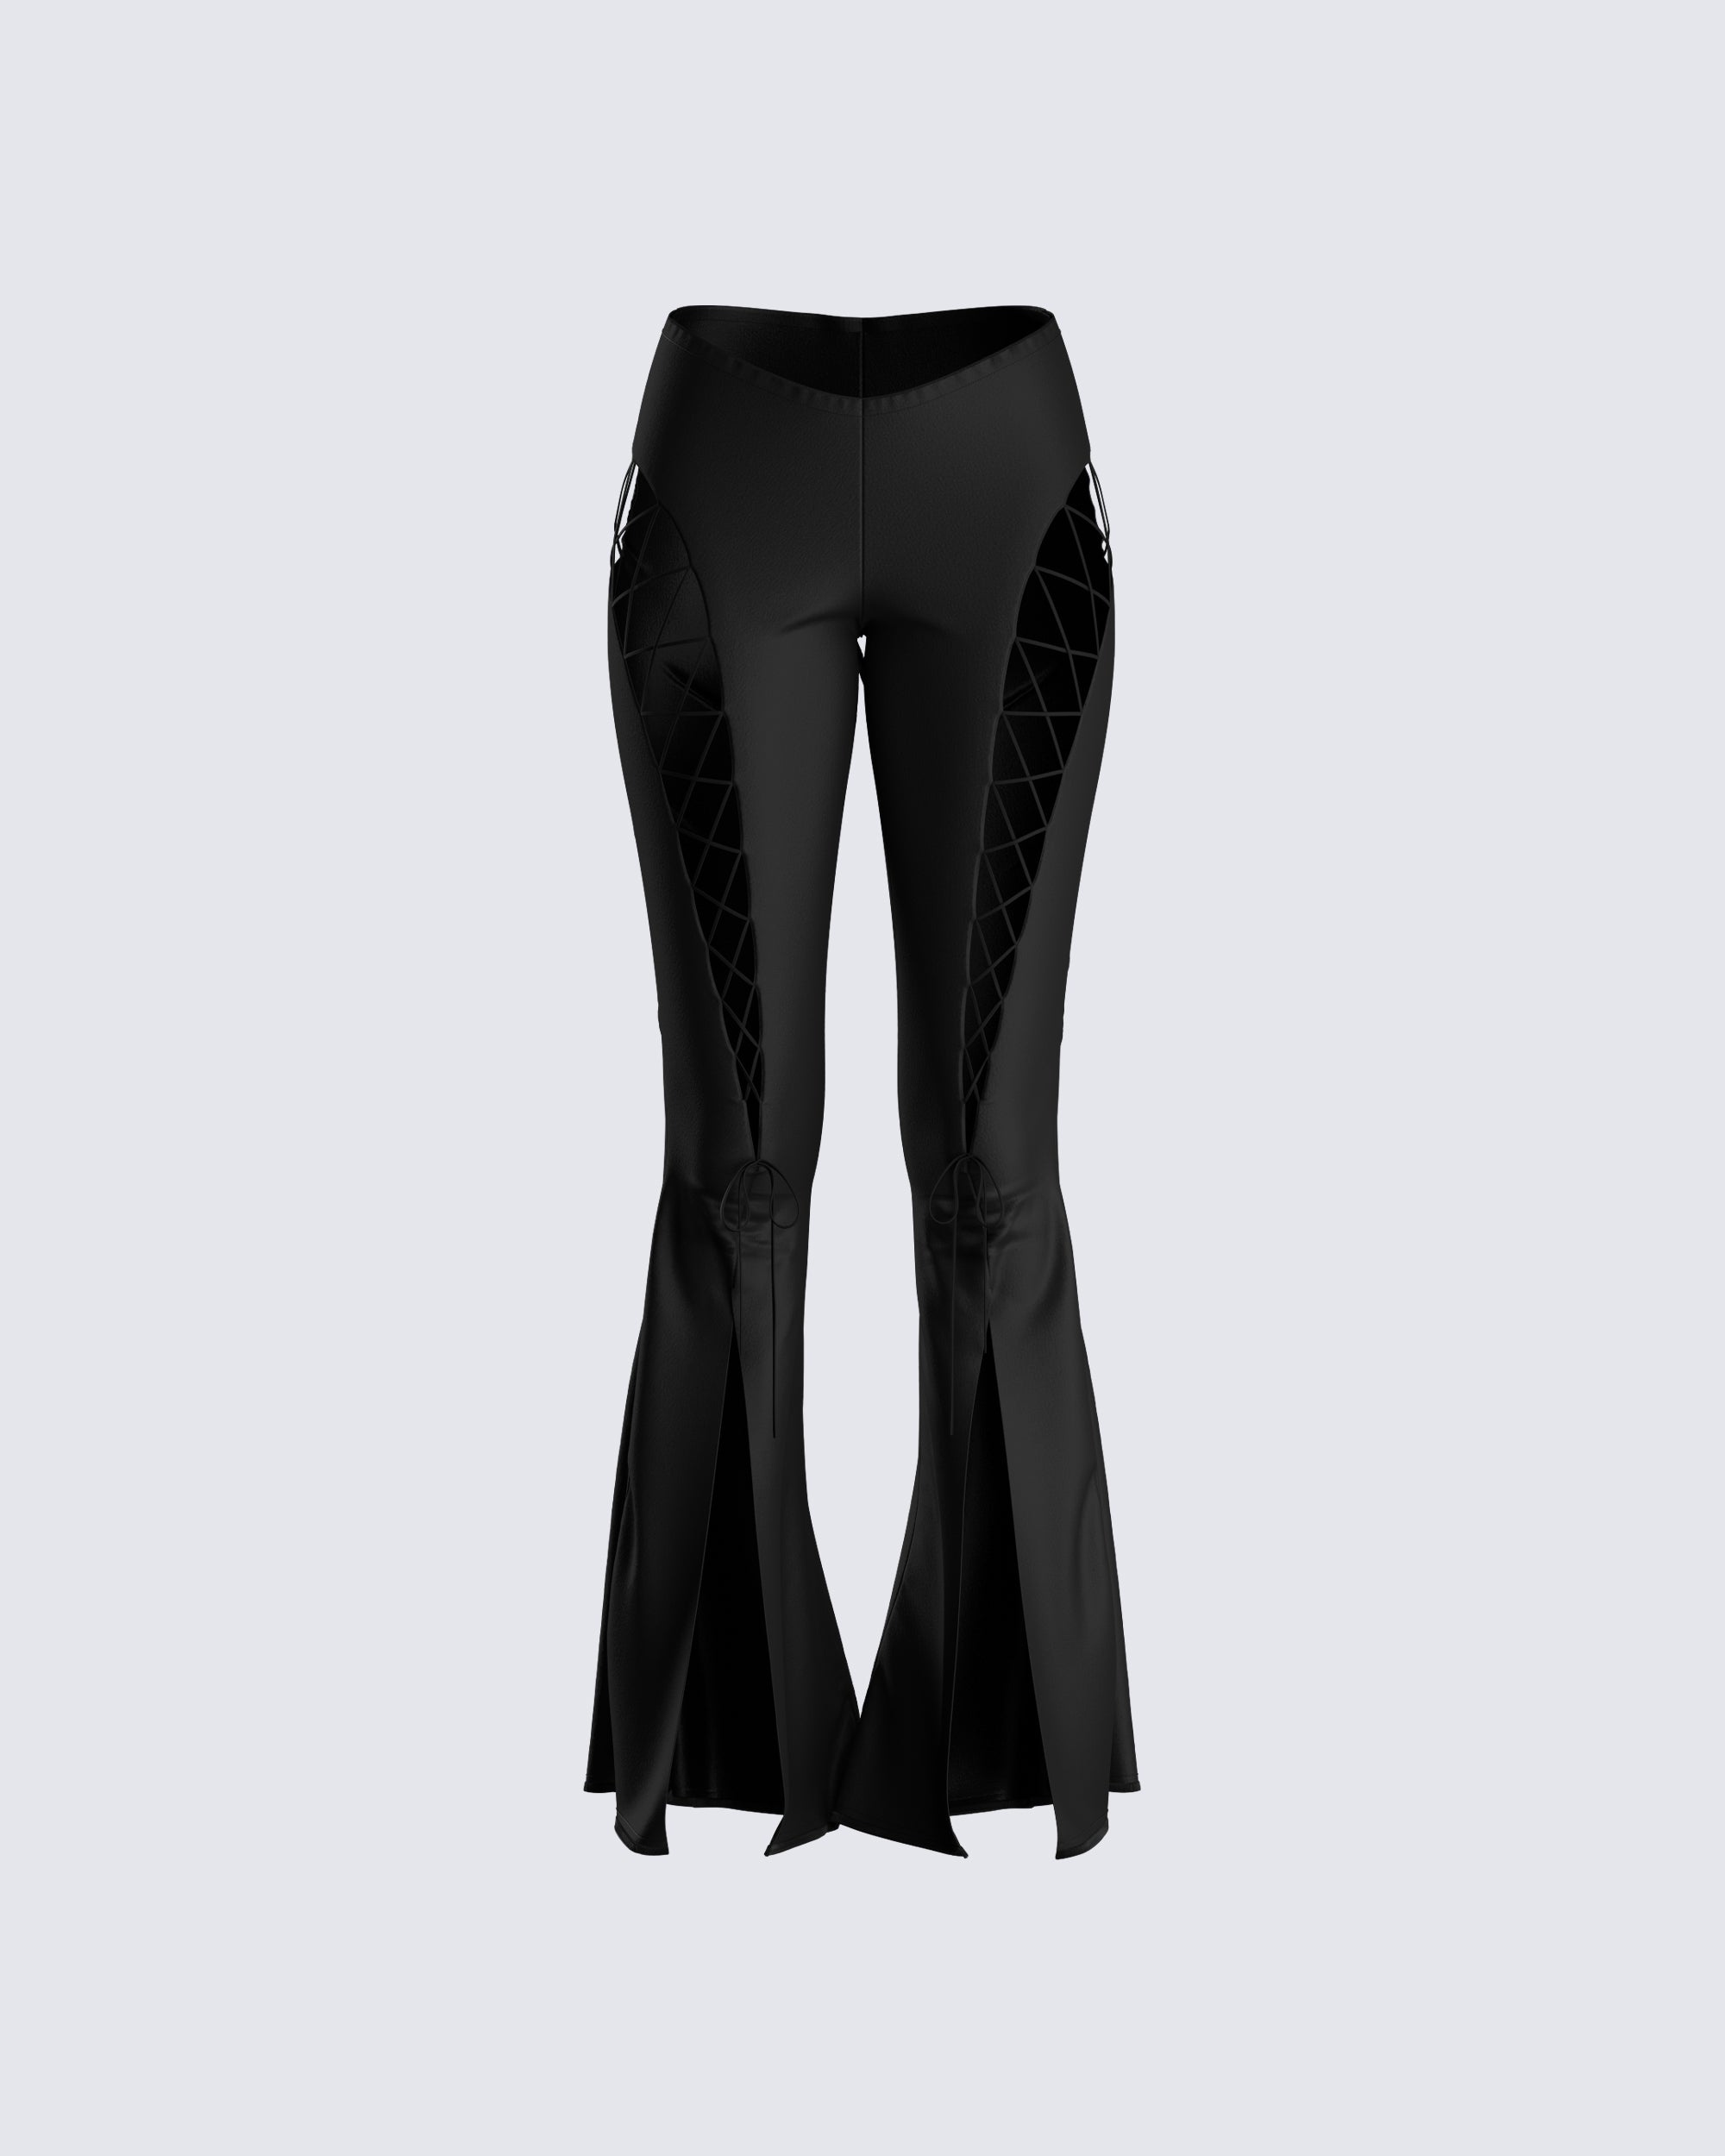 Hot Topic Social Collision Black Buckle Lace-Up Flare Pants